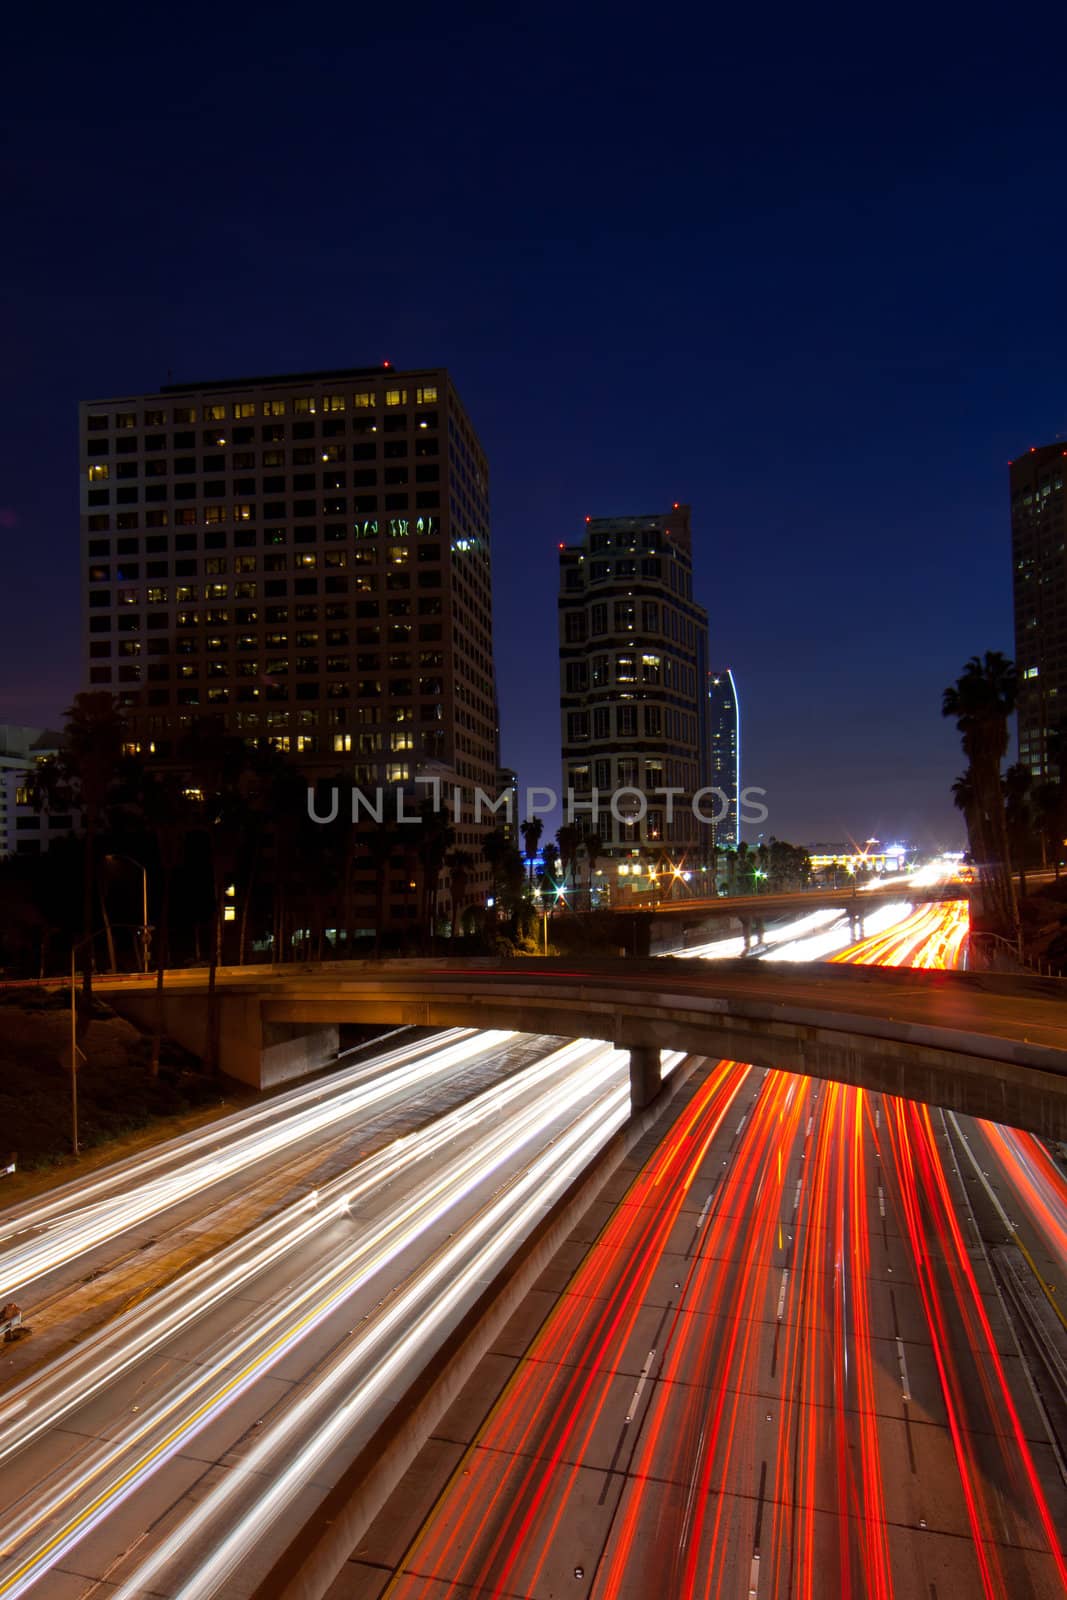 A photograph of the famous Route 101 at night!